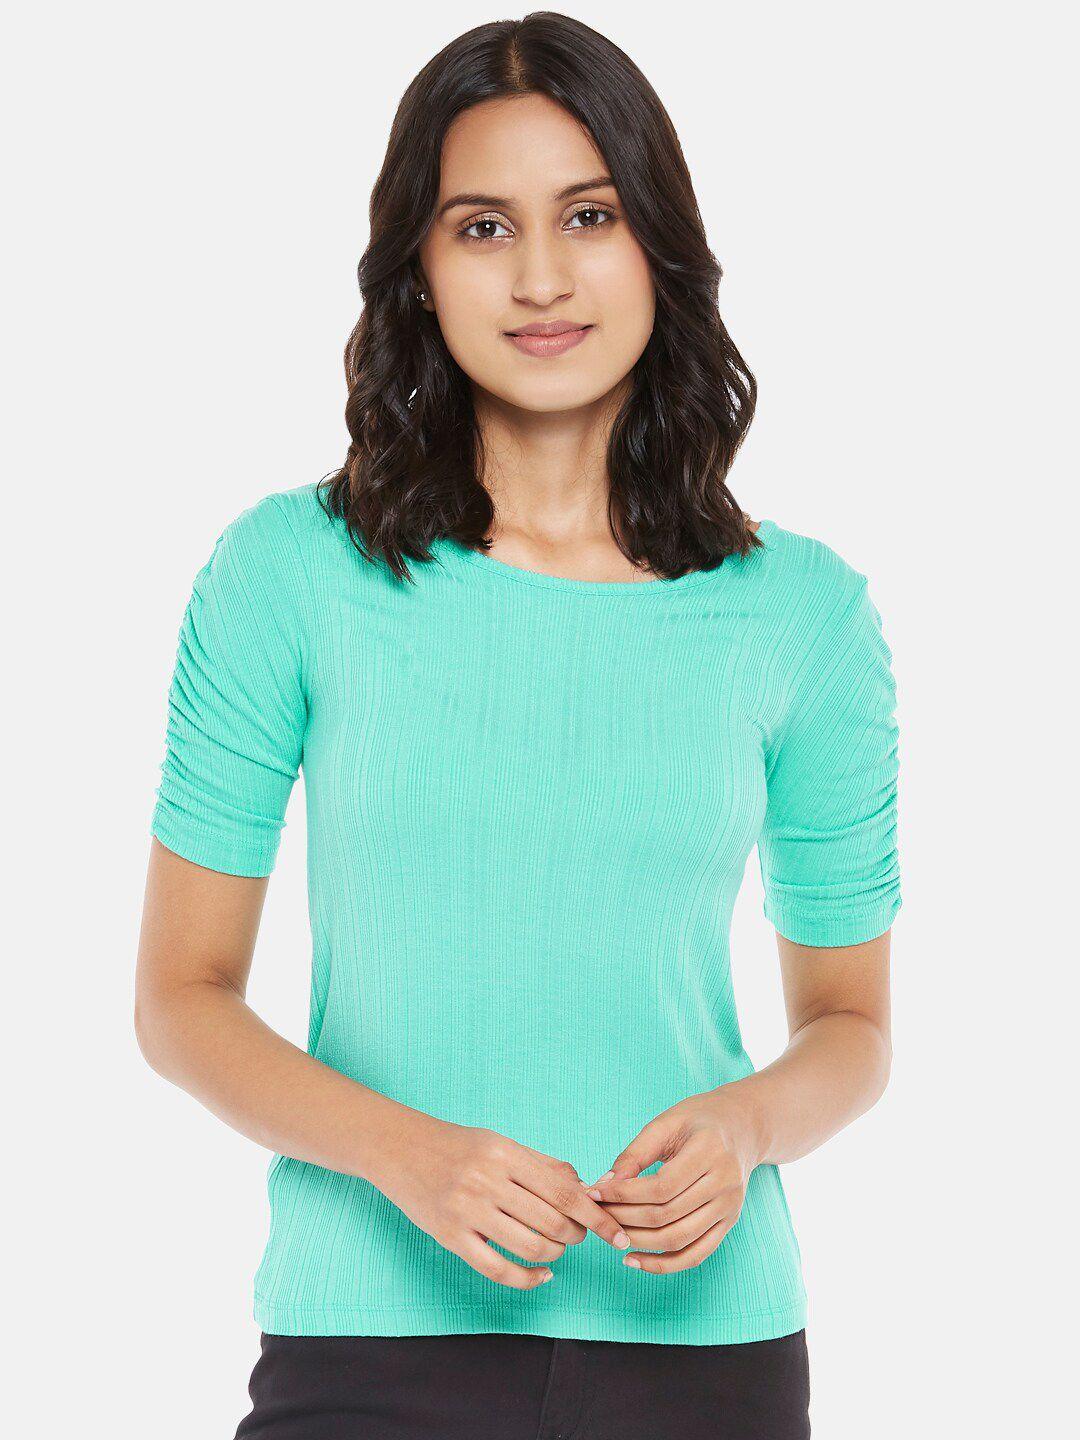 honey-by-pantaloons-green-self-striped-top-with-gathered-sleeves